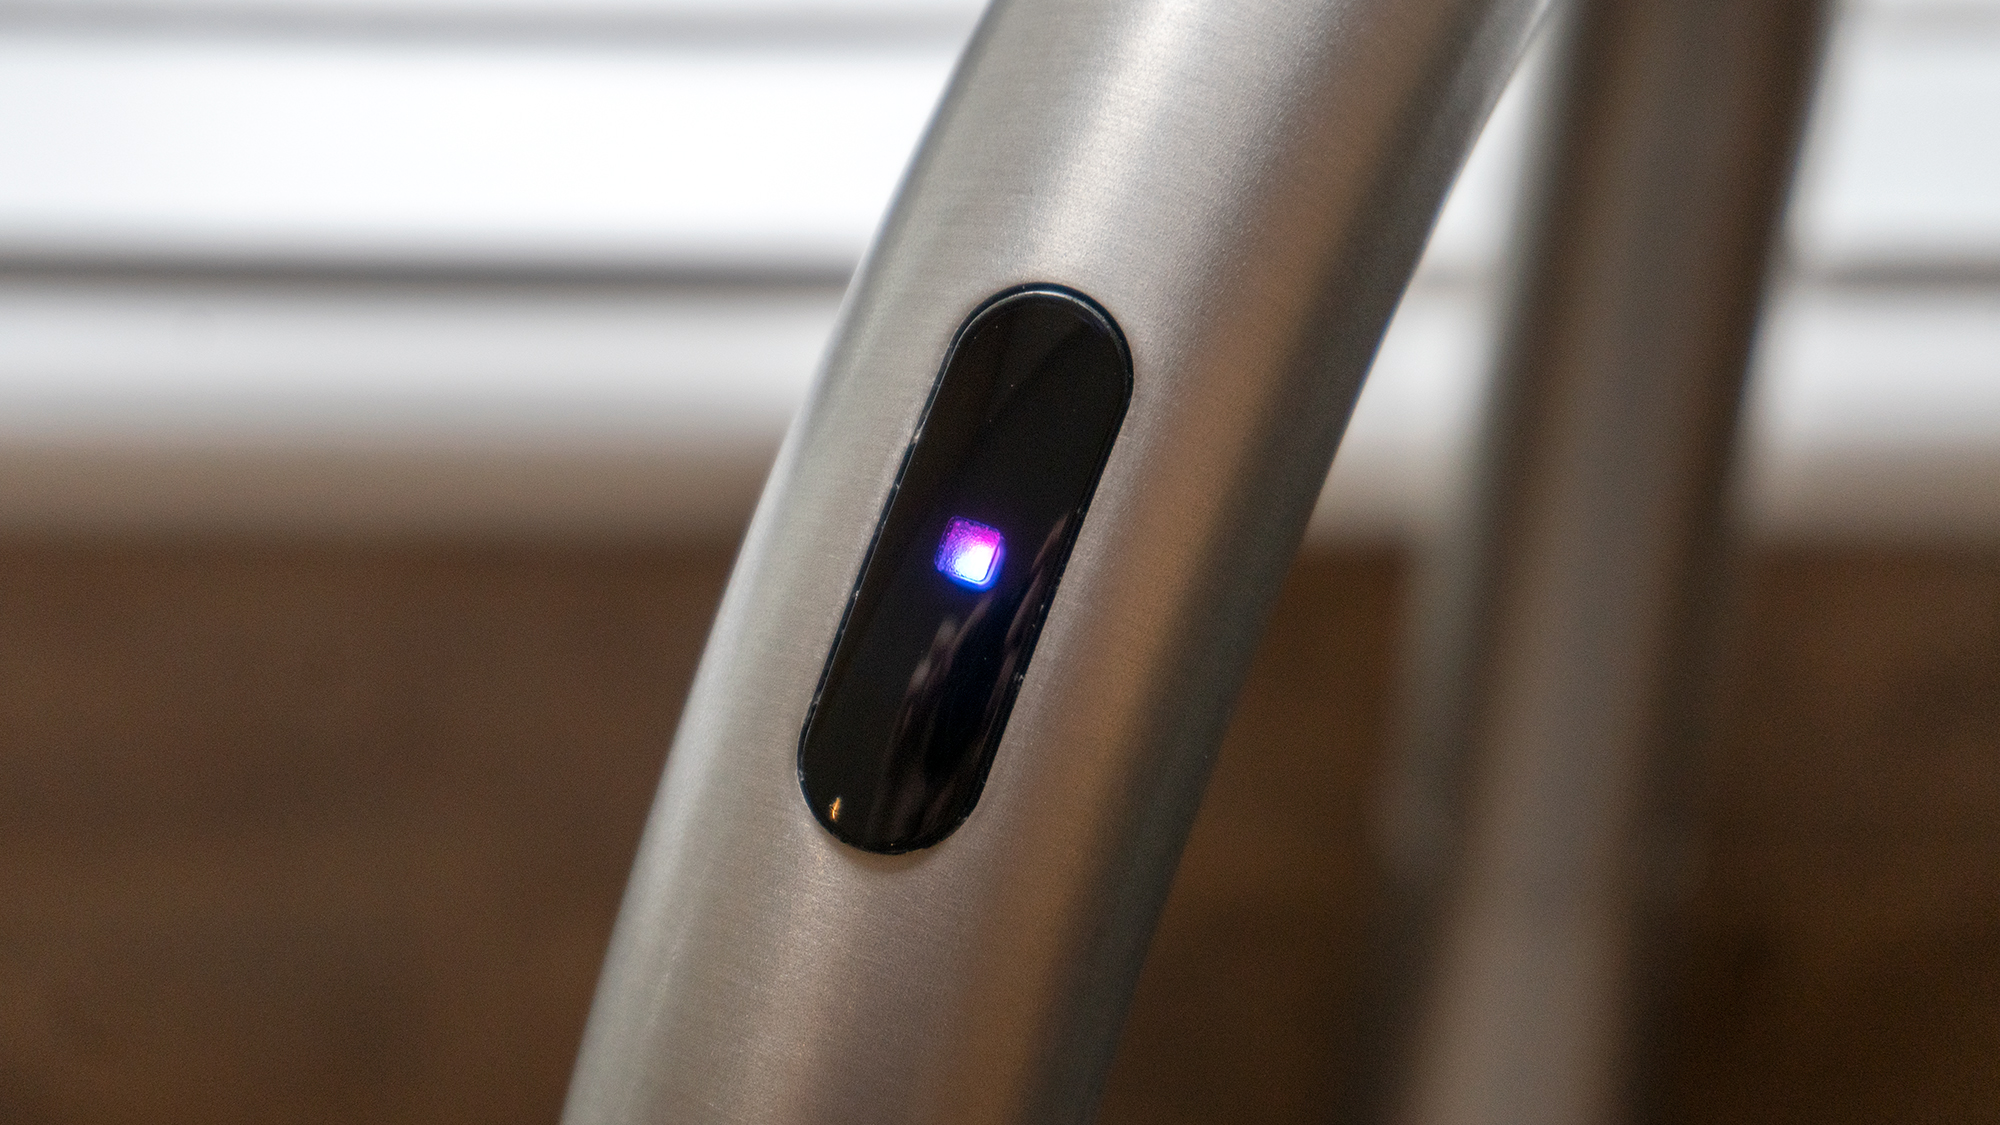 An LED that goes from blue to purple to red to visually indicate the temperature of the flowing water helps ensure you'll never get burned again by unexpected hot water. (Photo: Andrew Liszewski/Gizmodo)